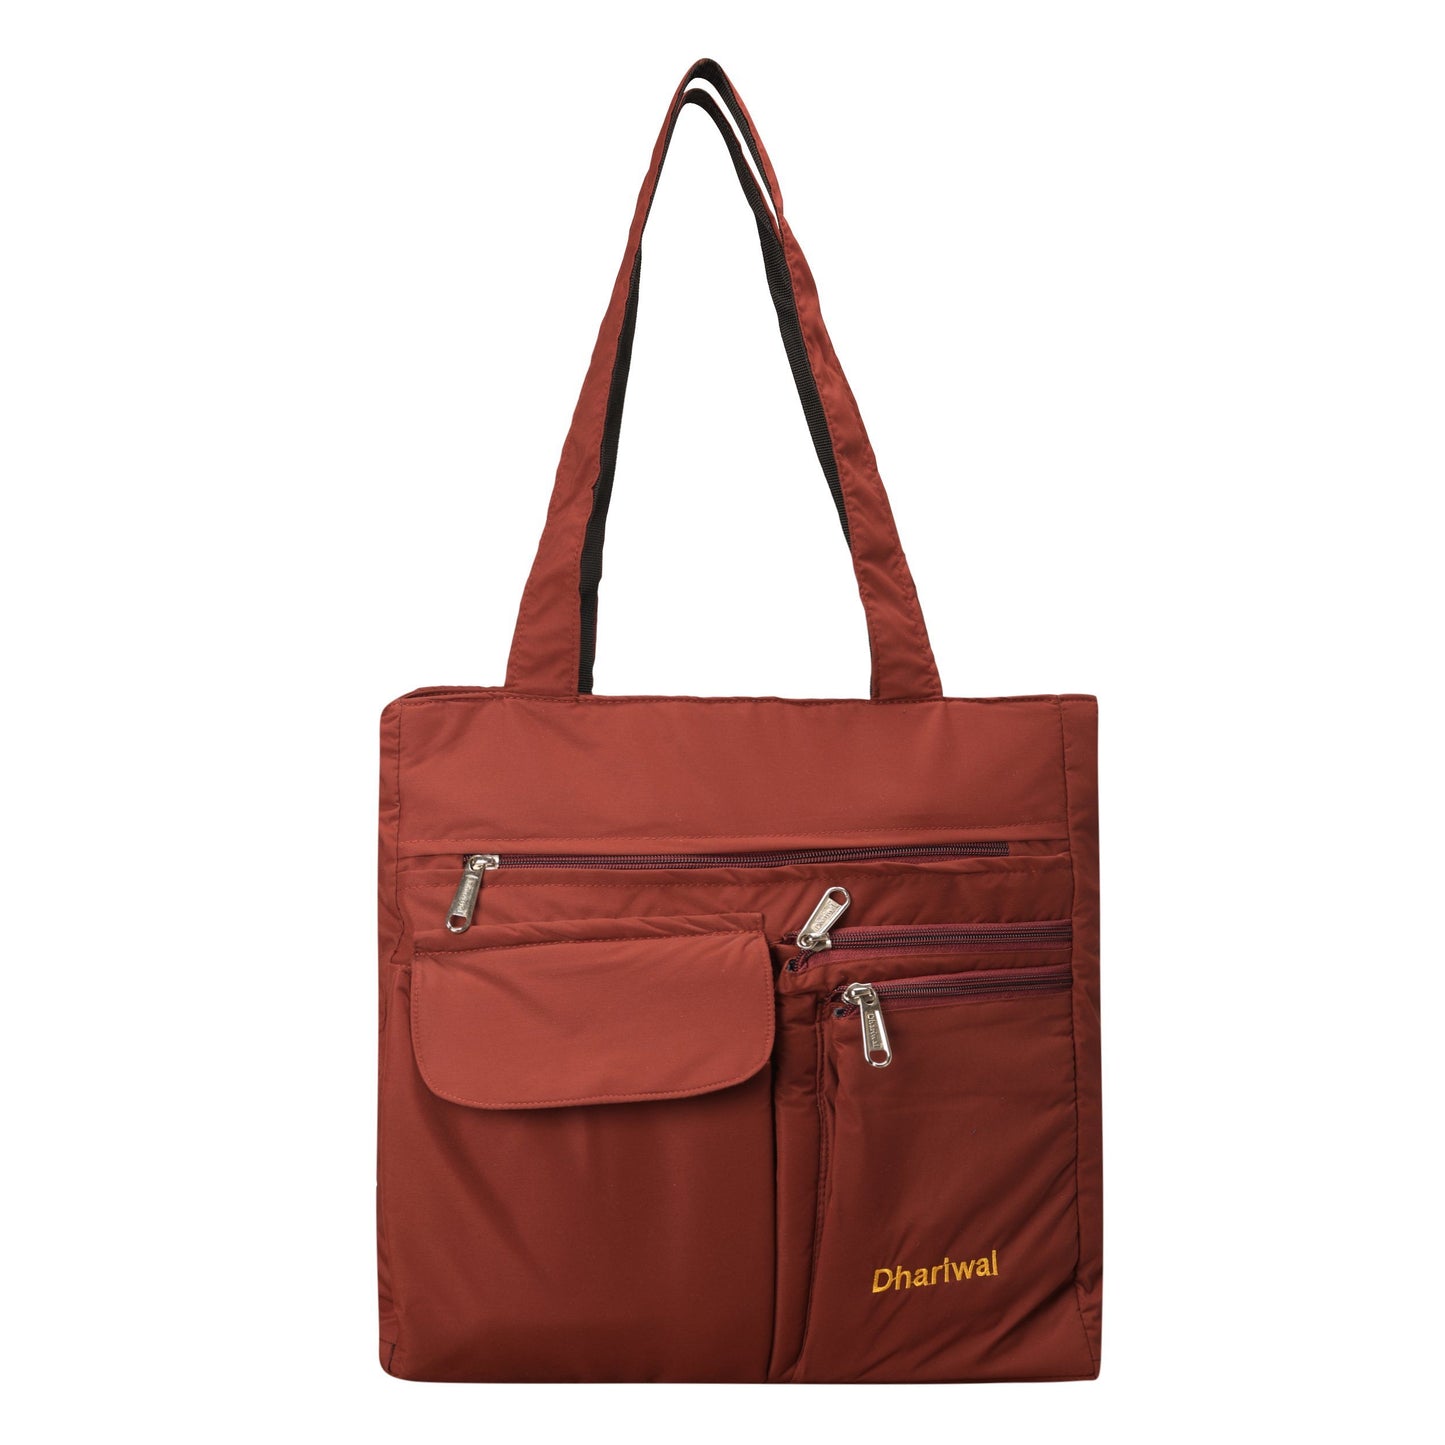 Dhariwal PU Twin Handle Water Resistant Ladies Shopping Bag, Vanity Bag for Carriage, Travel, Casual, Outdoor, Party, Kitty Shopping Bags Mohanlal Jain (Dhariwal Bags) Maroon 